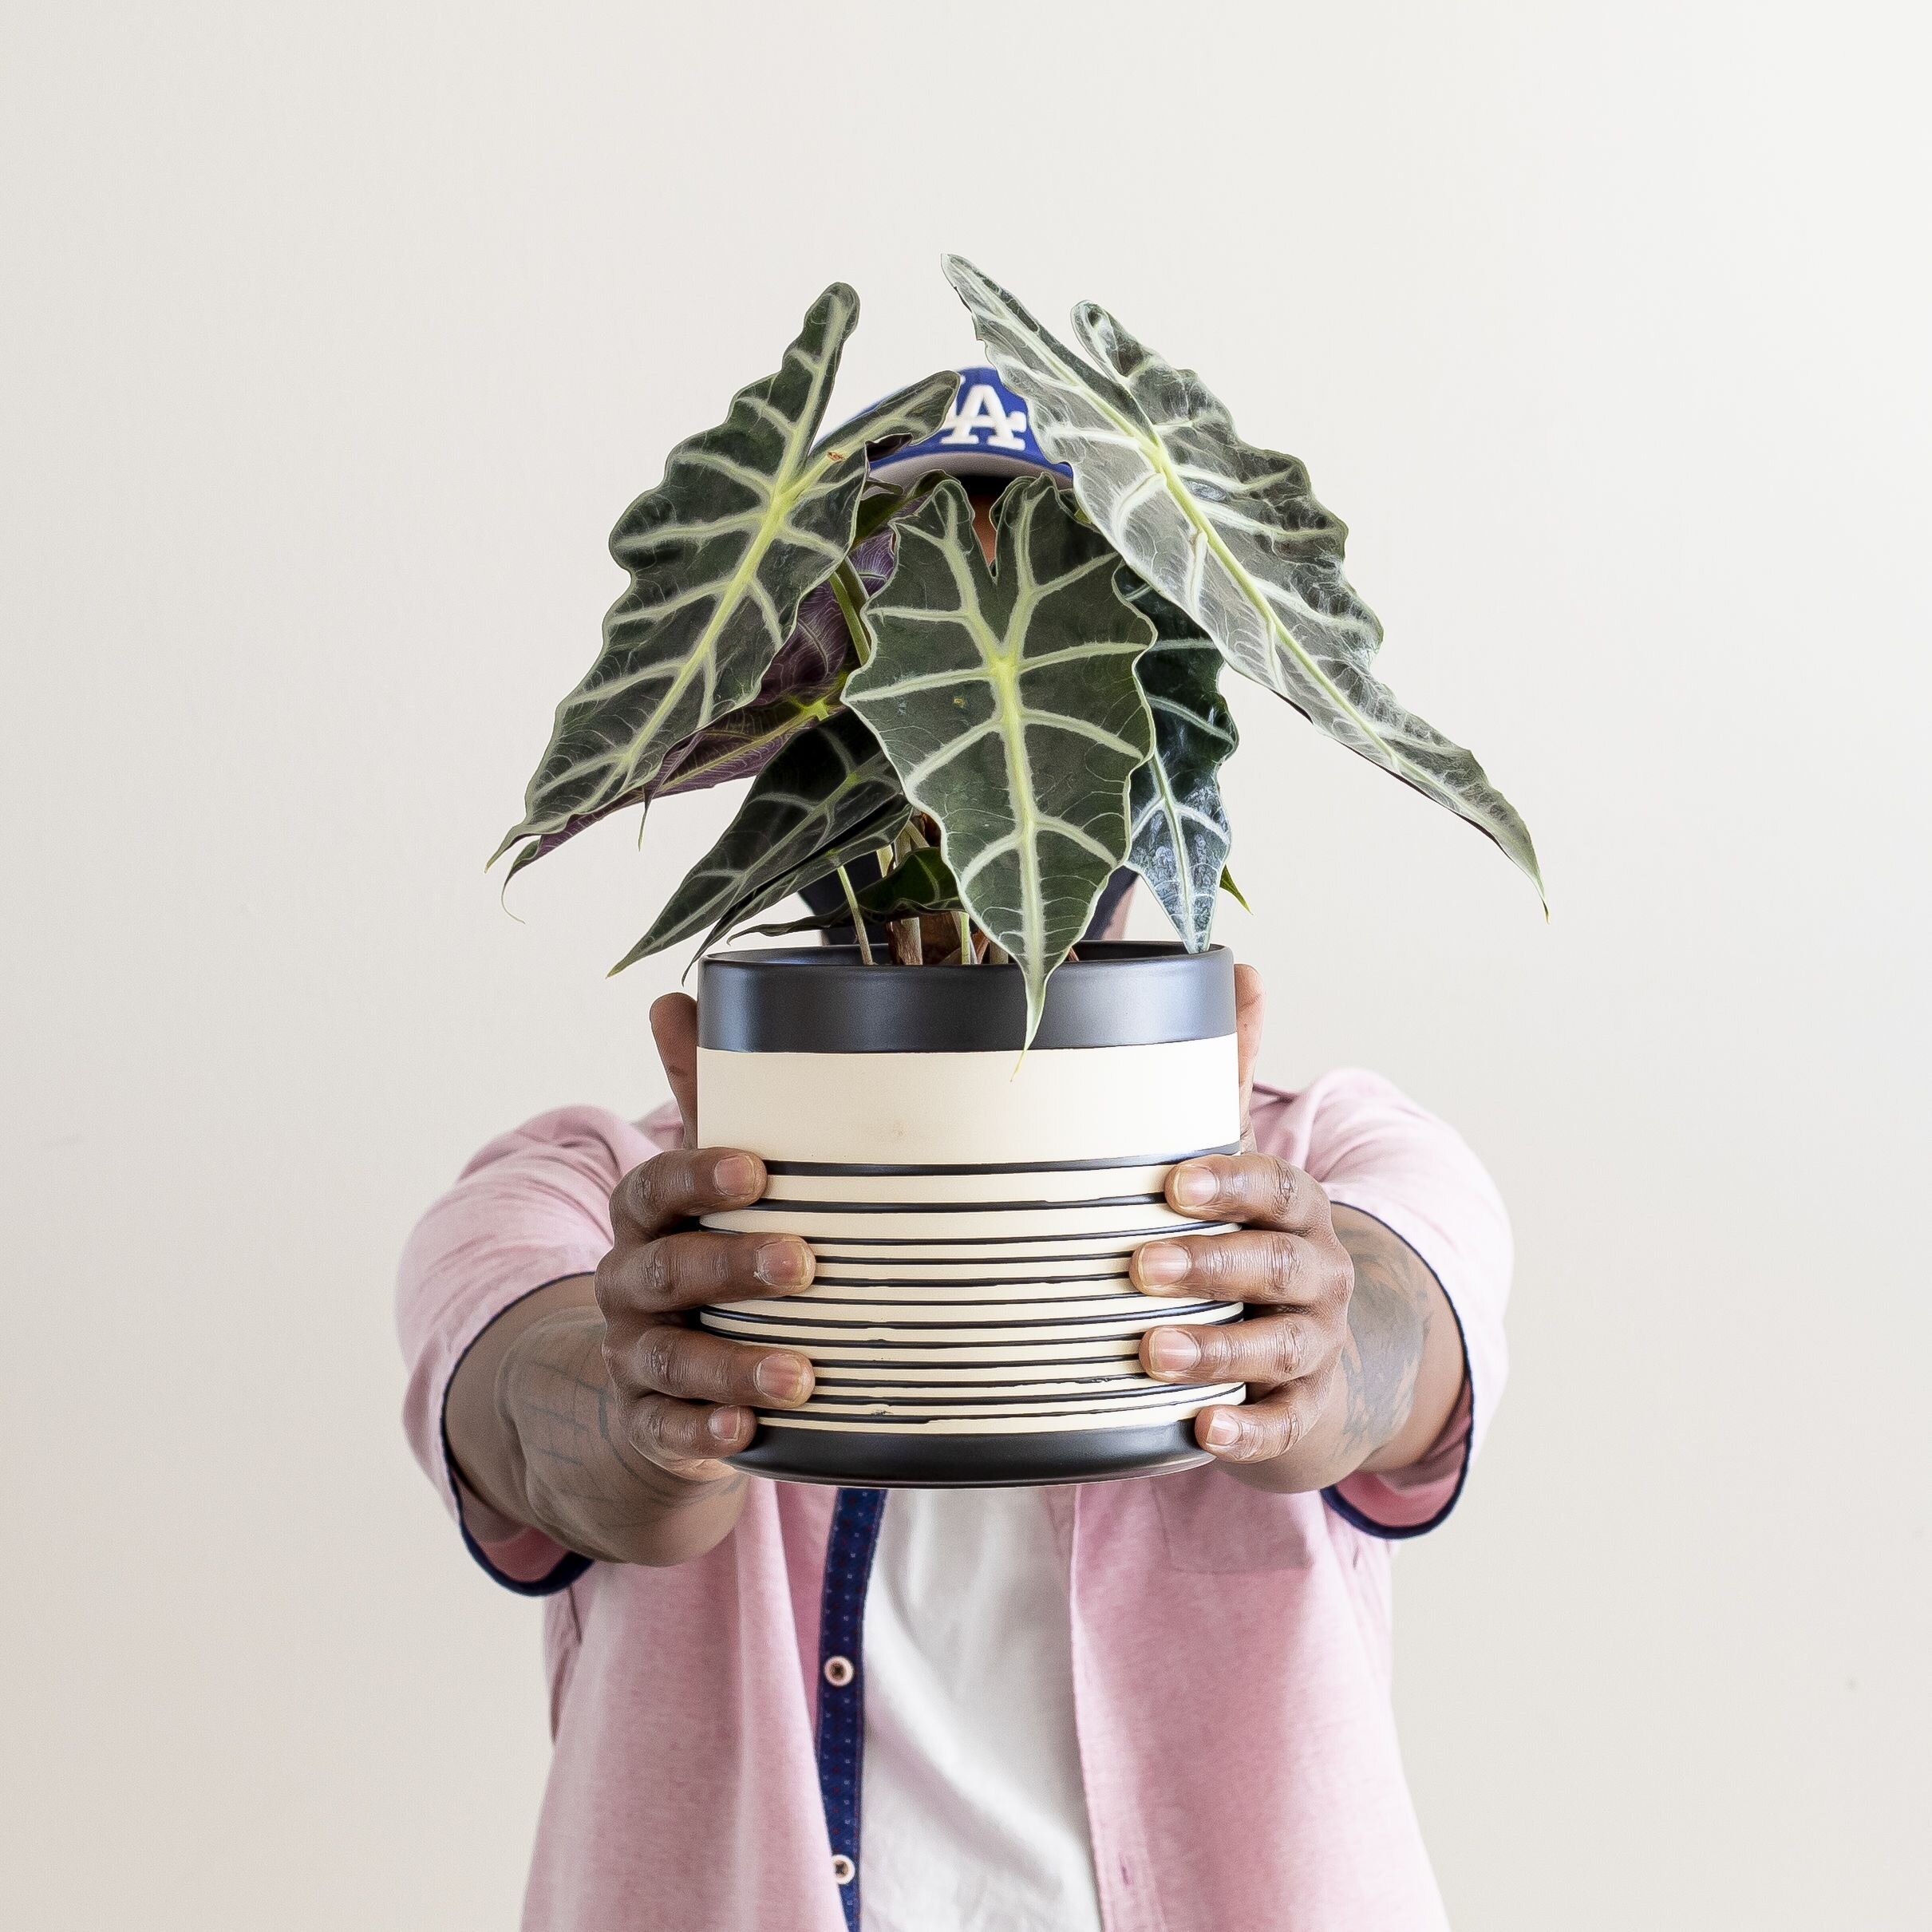 An Alocasia plant in a black and cream striped pot being held up by a person in front of a neutral background